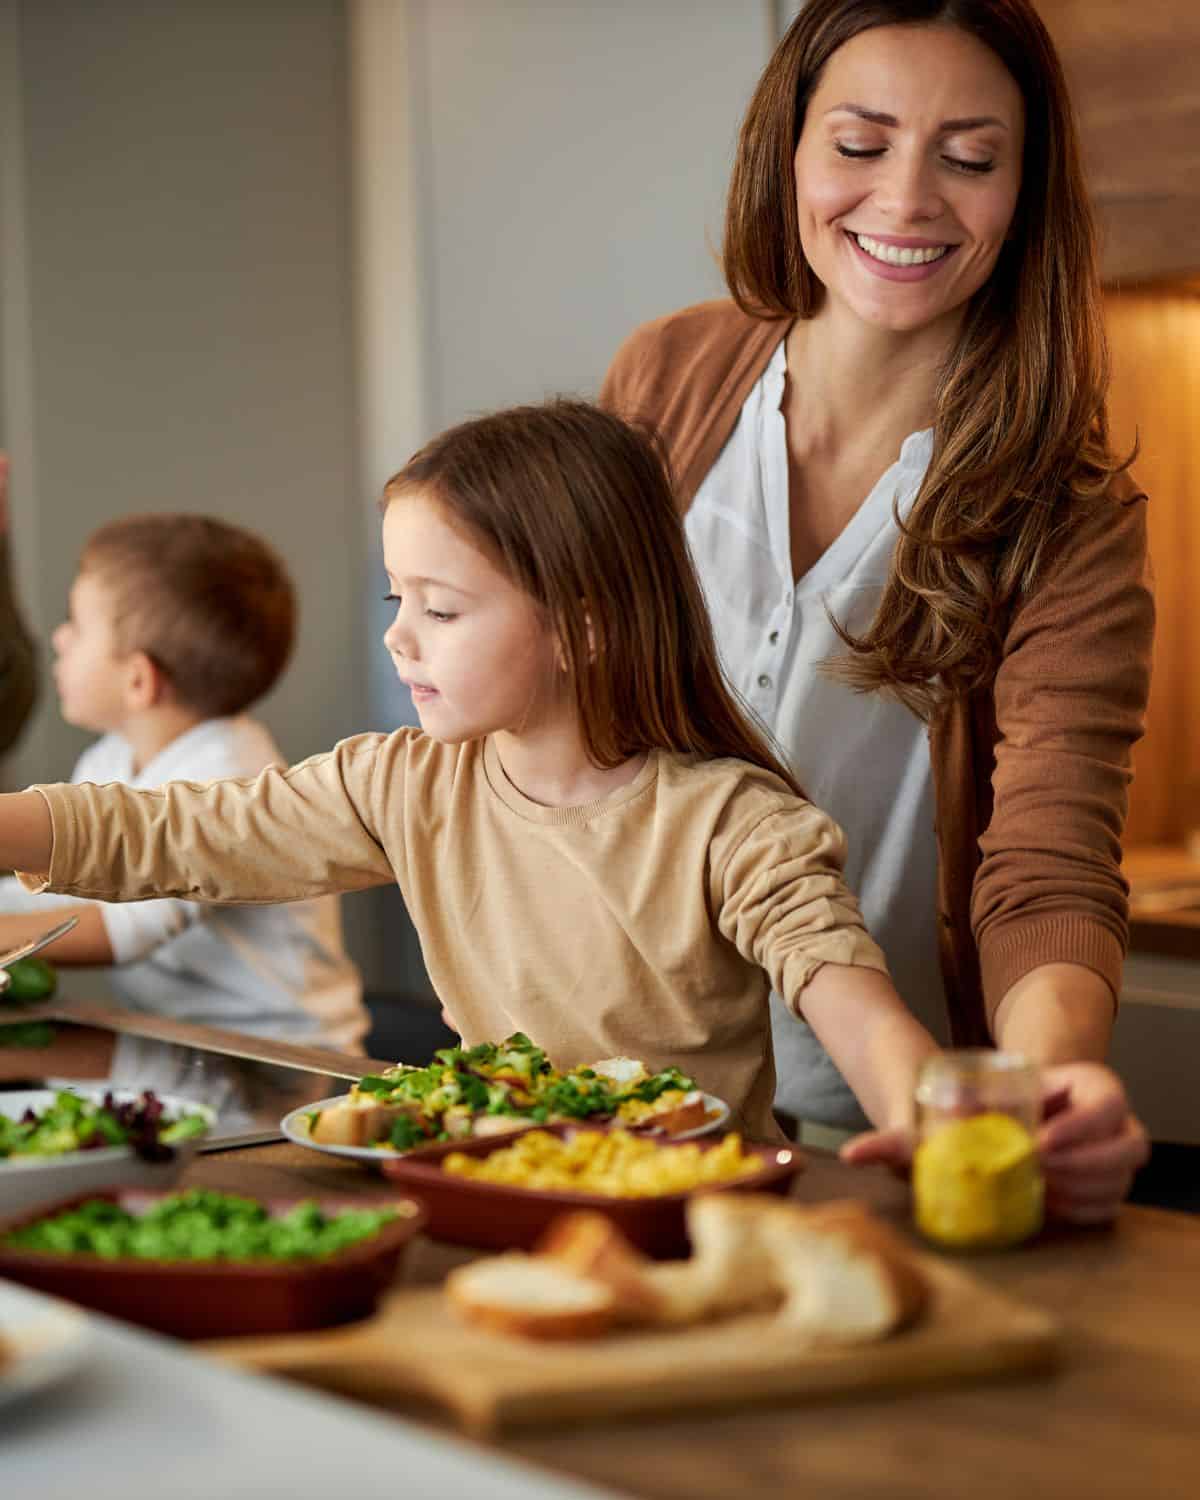 Image of a mom cooking with her daughter to creat balanced vegan meals.